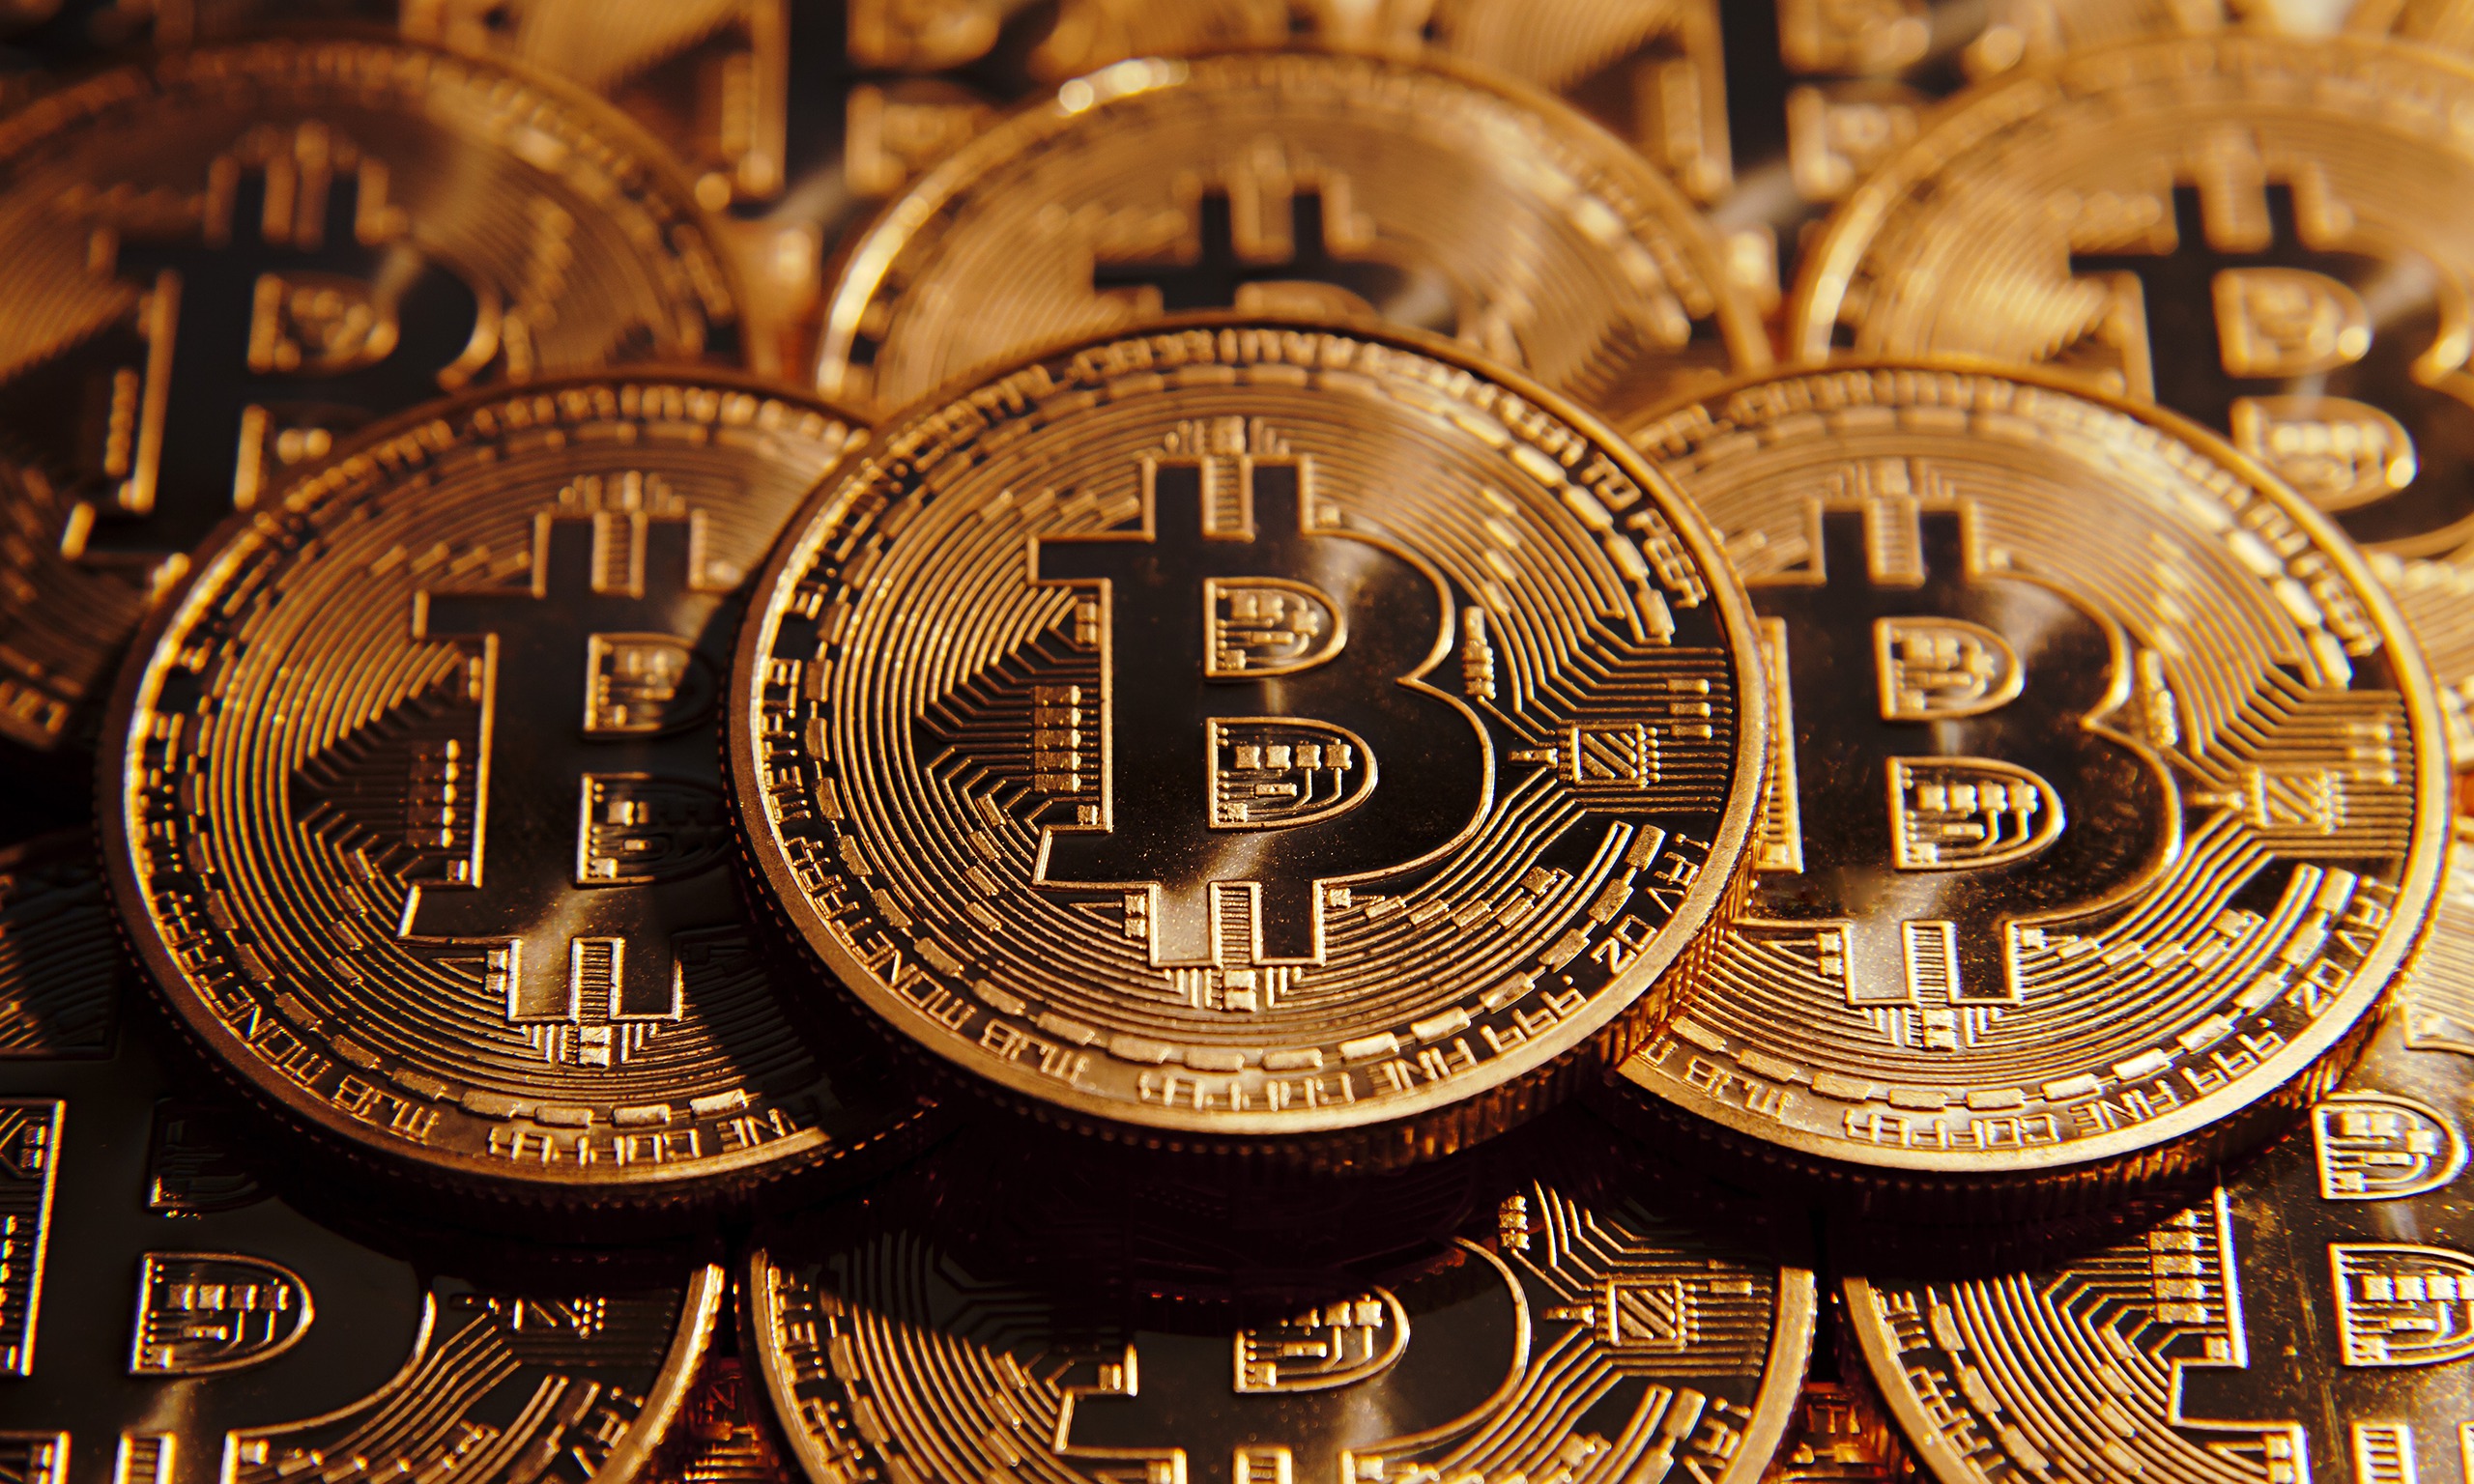 Bitcoin: What's behind the gold rush? | Murray Priestley